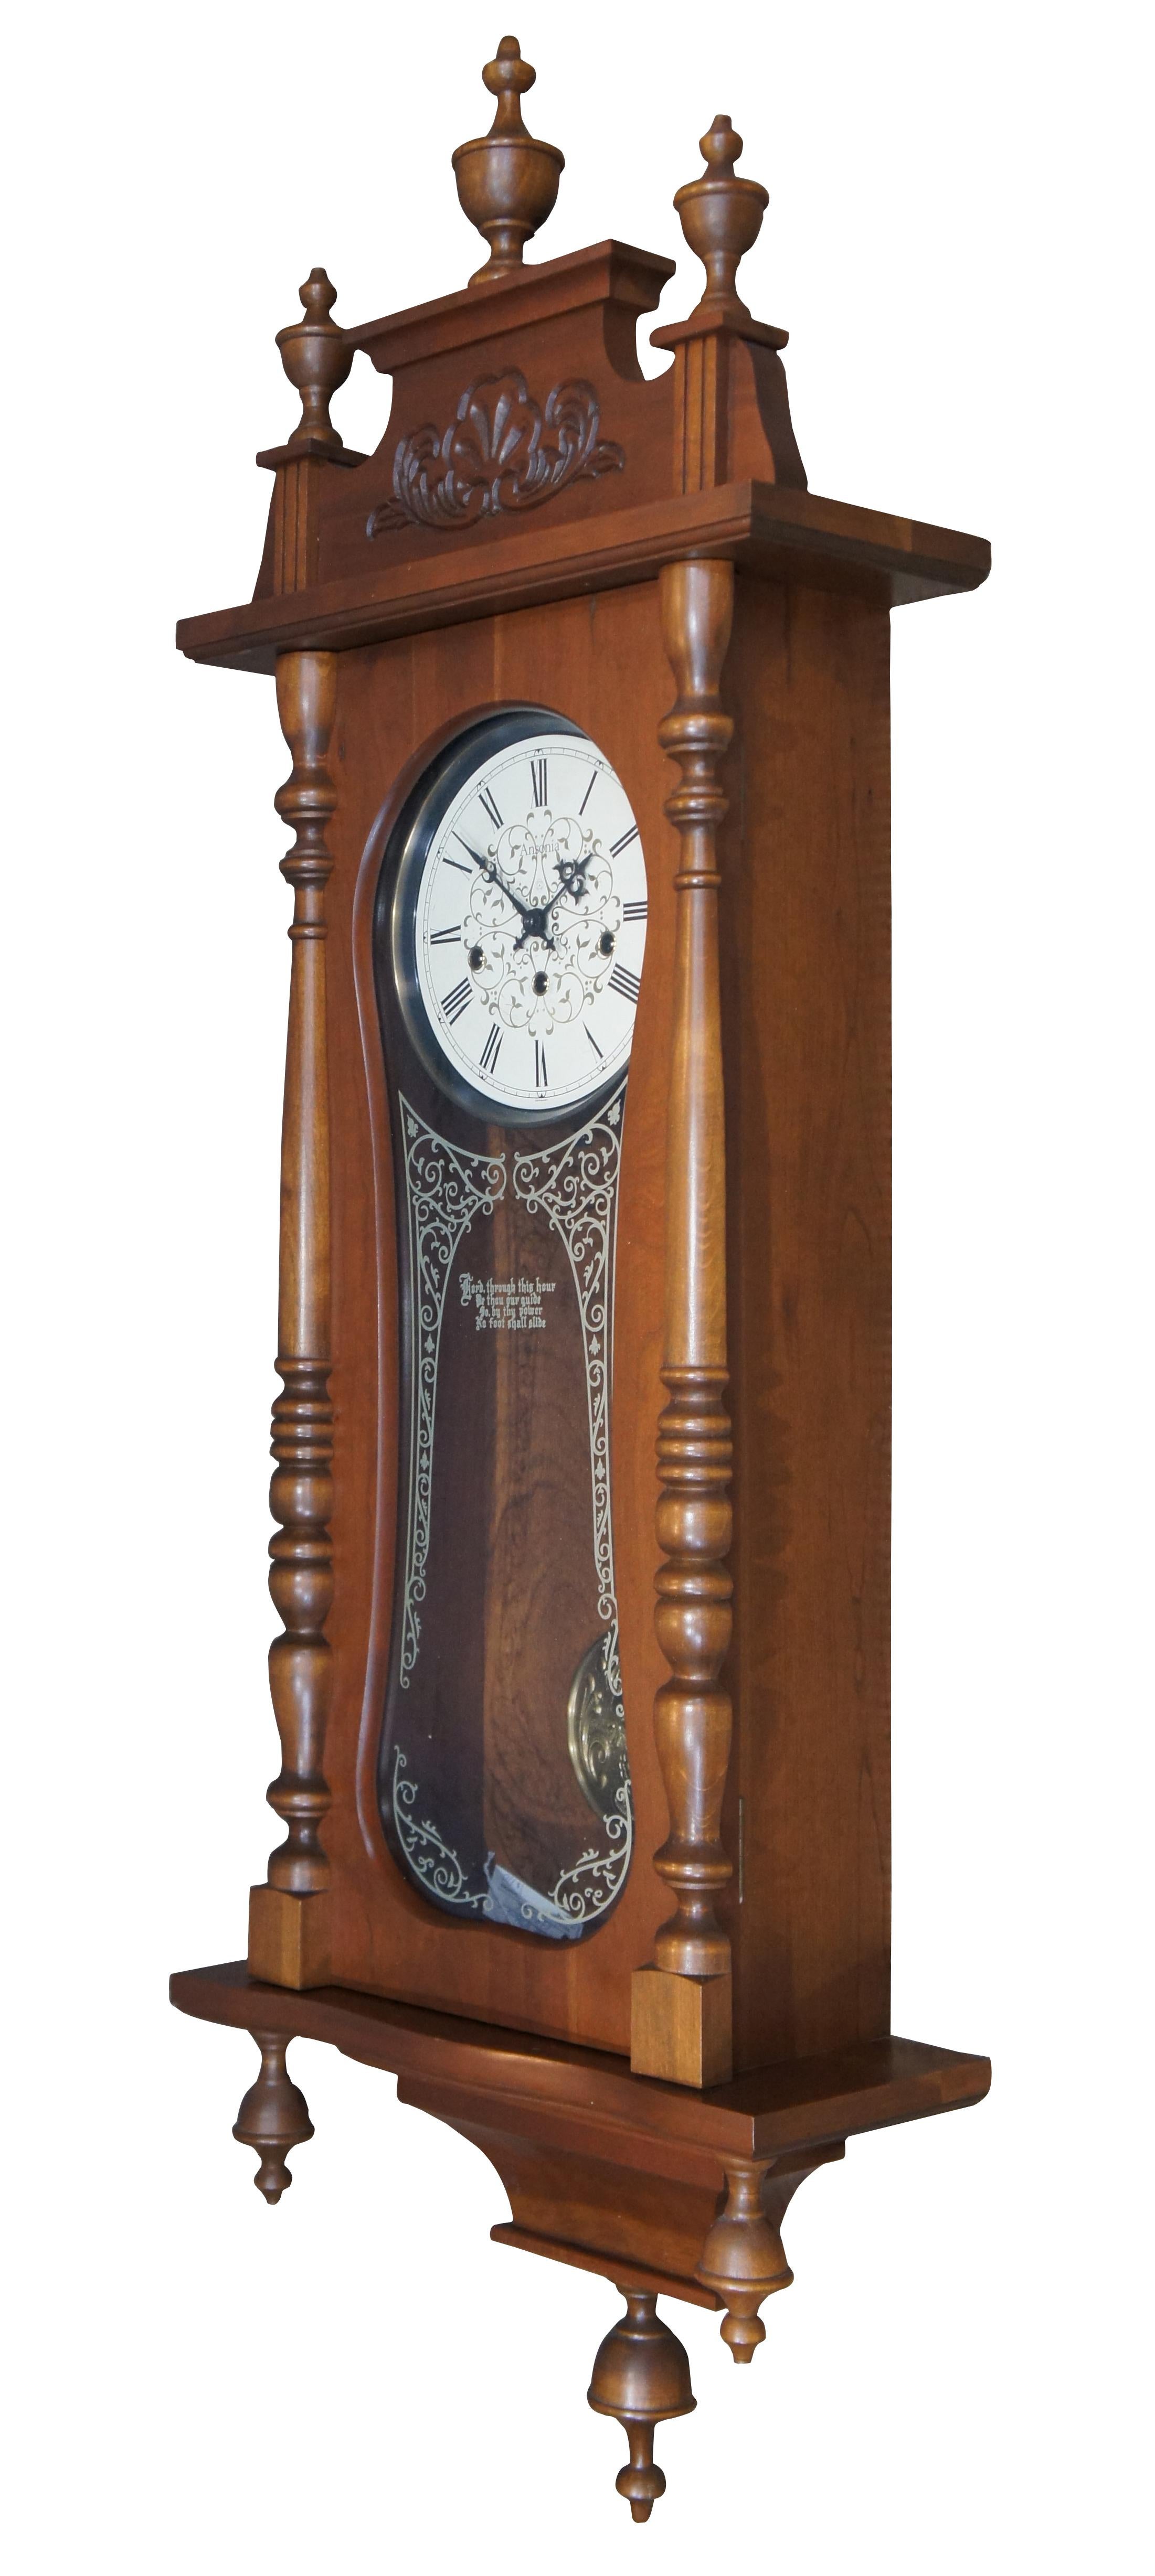 Vintage Ezee-Set #725 wall clock by Ansonia Clock Company. Case features spindle columns and urn shaped finials, carved scallop/floral detail on the pediment, molded grapes on the brass pendulum, and a painted glass front with the words “Lord,